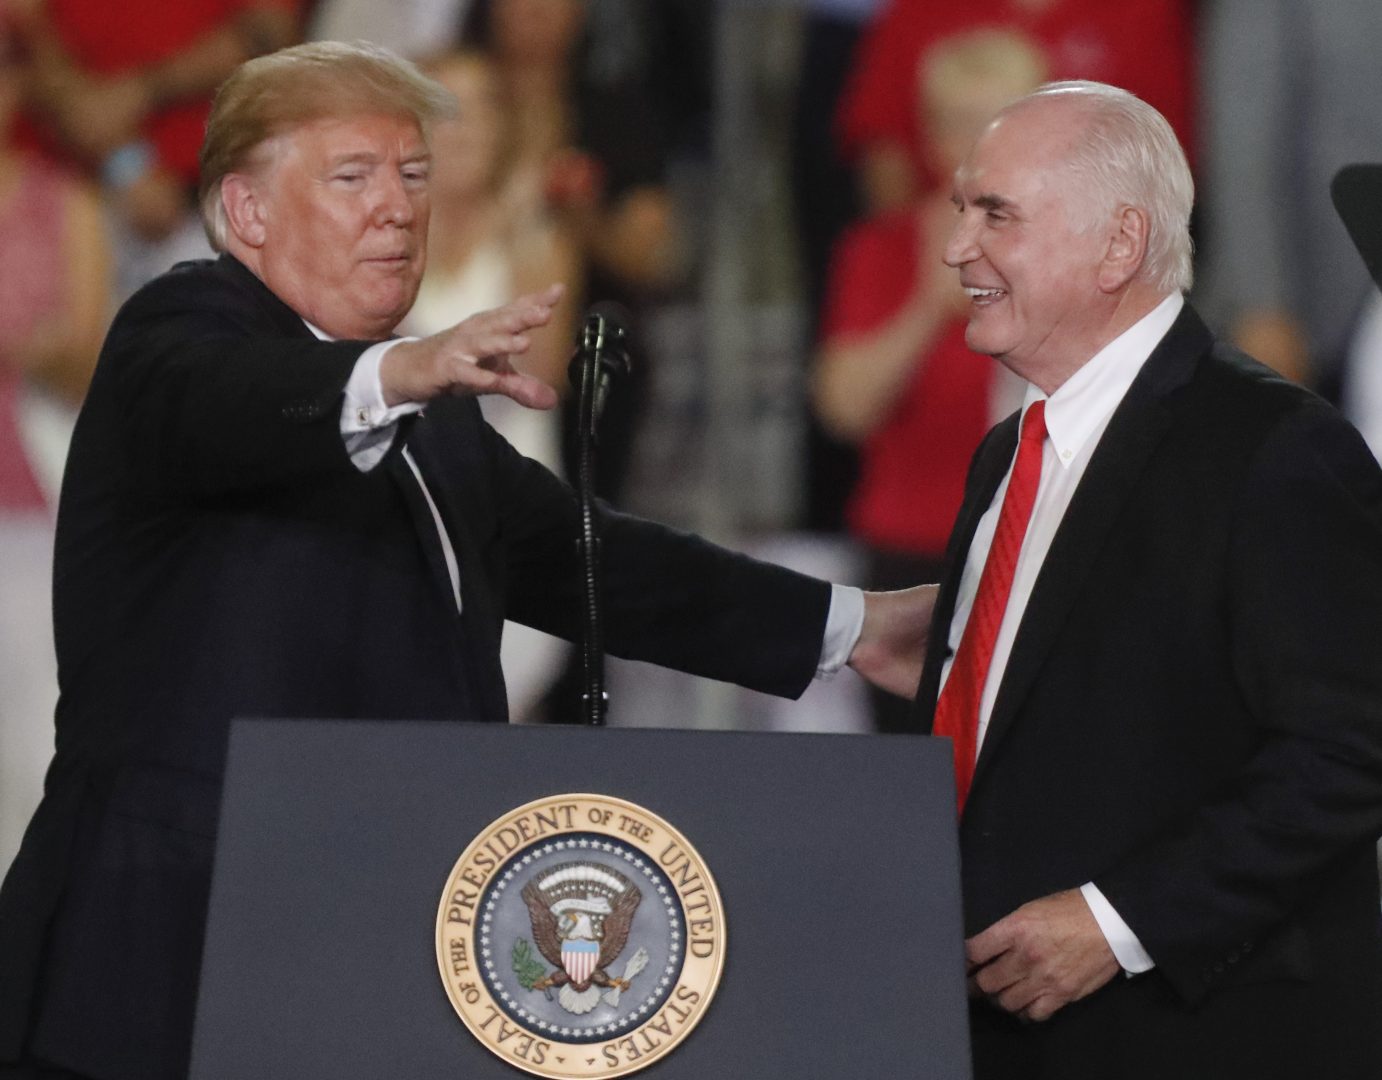 President Donald Trump, left introduces U.S. Congressman Mike Kelly at a rally endorsing the Republican ticket in Pennsylvania on Wednesday, Oct. 10, 2018 in Erie, Pa. 